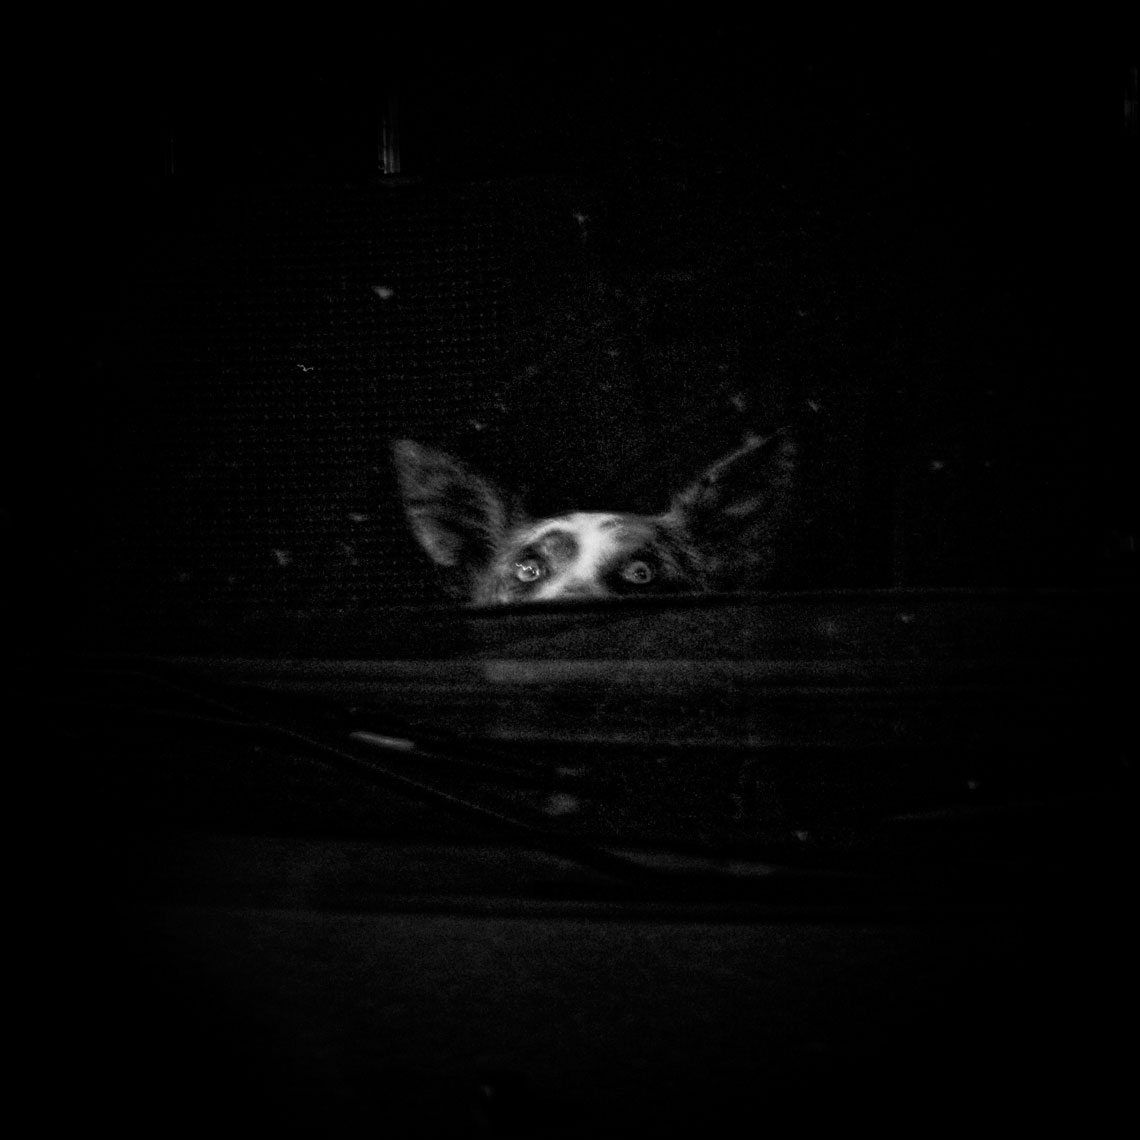 ITALY. Florence, 10th June 2010. A dog in a car.